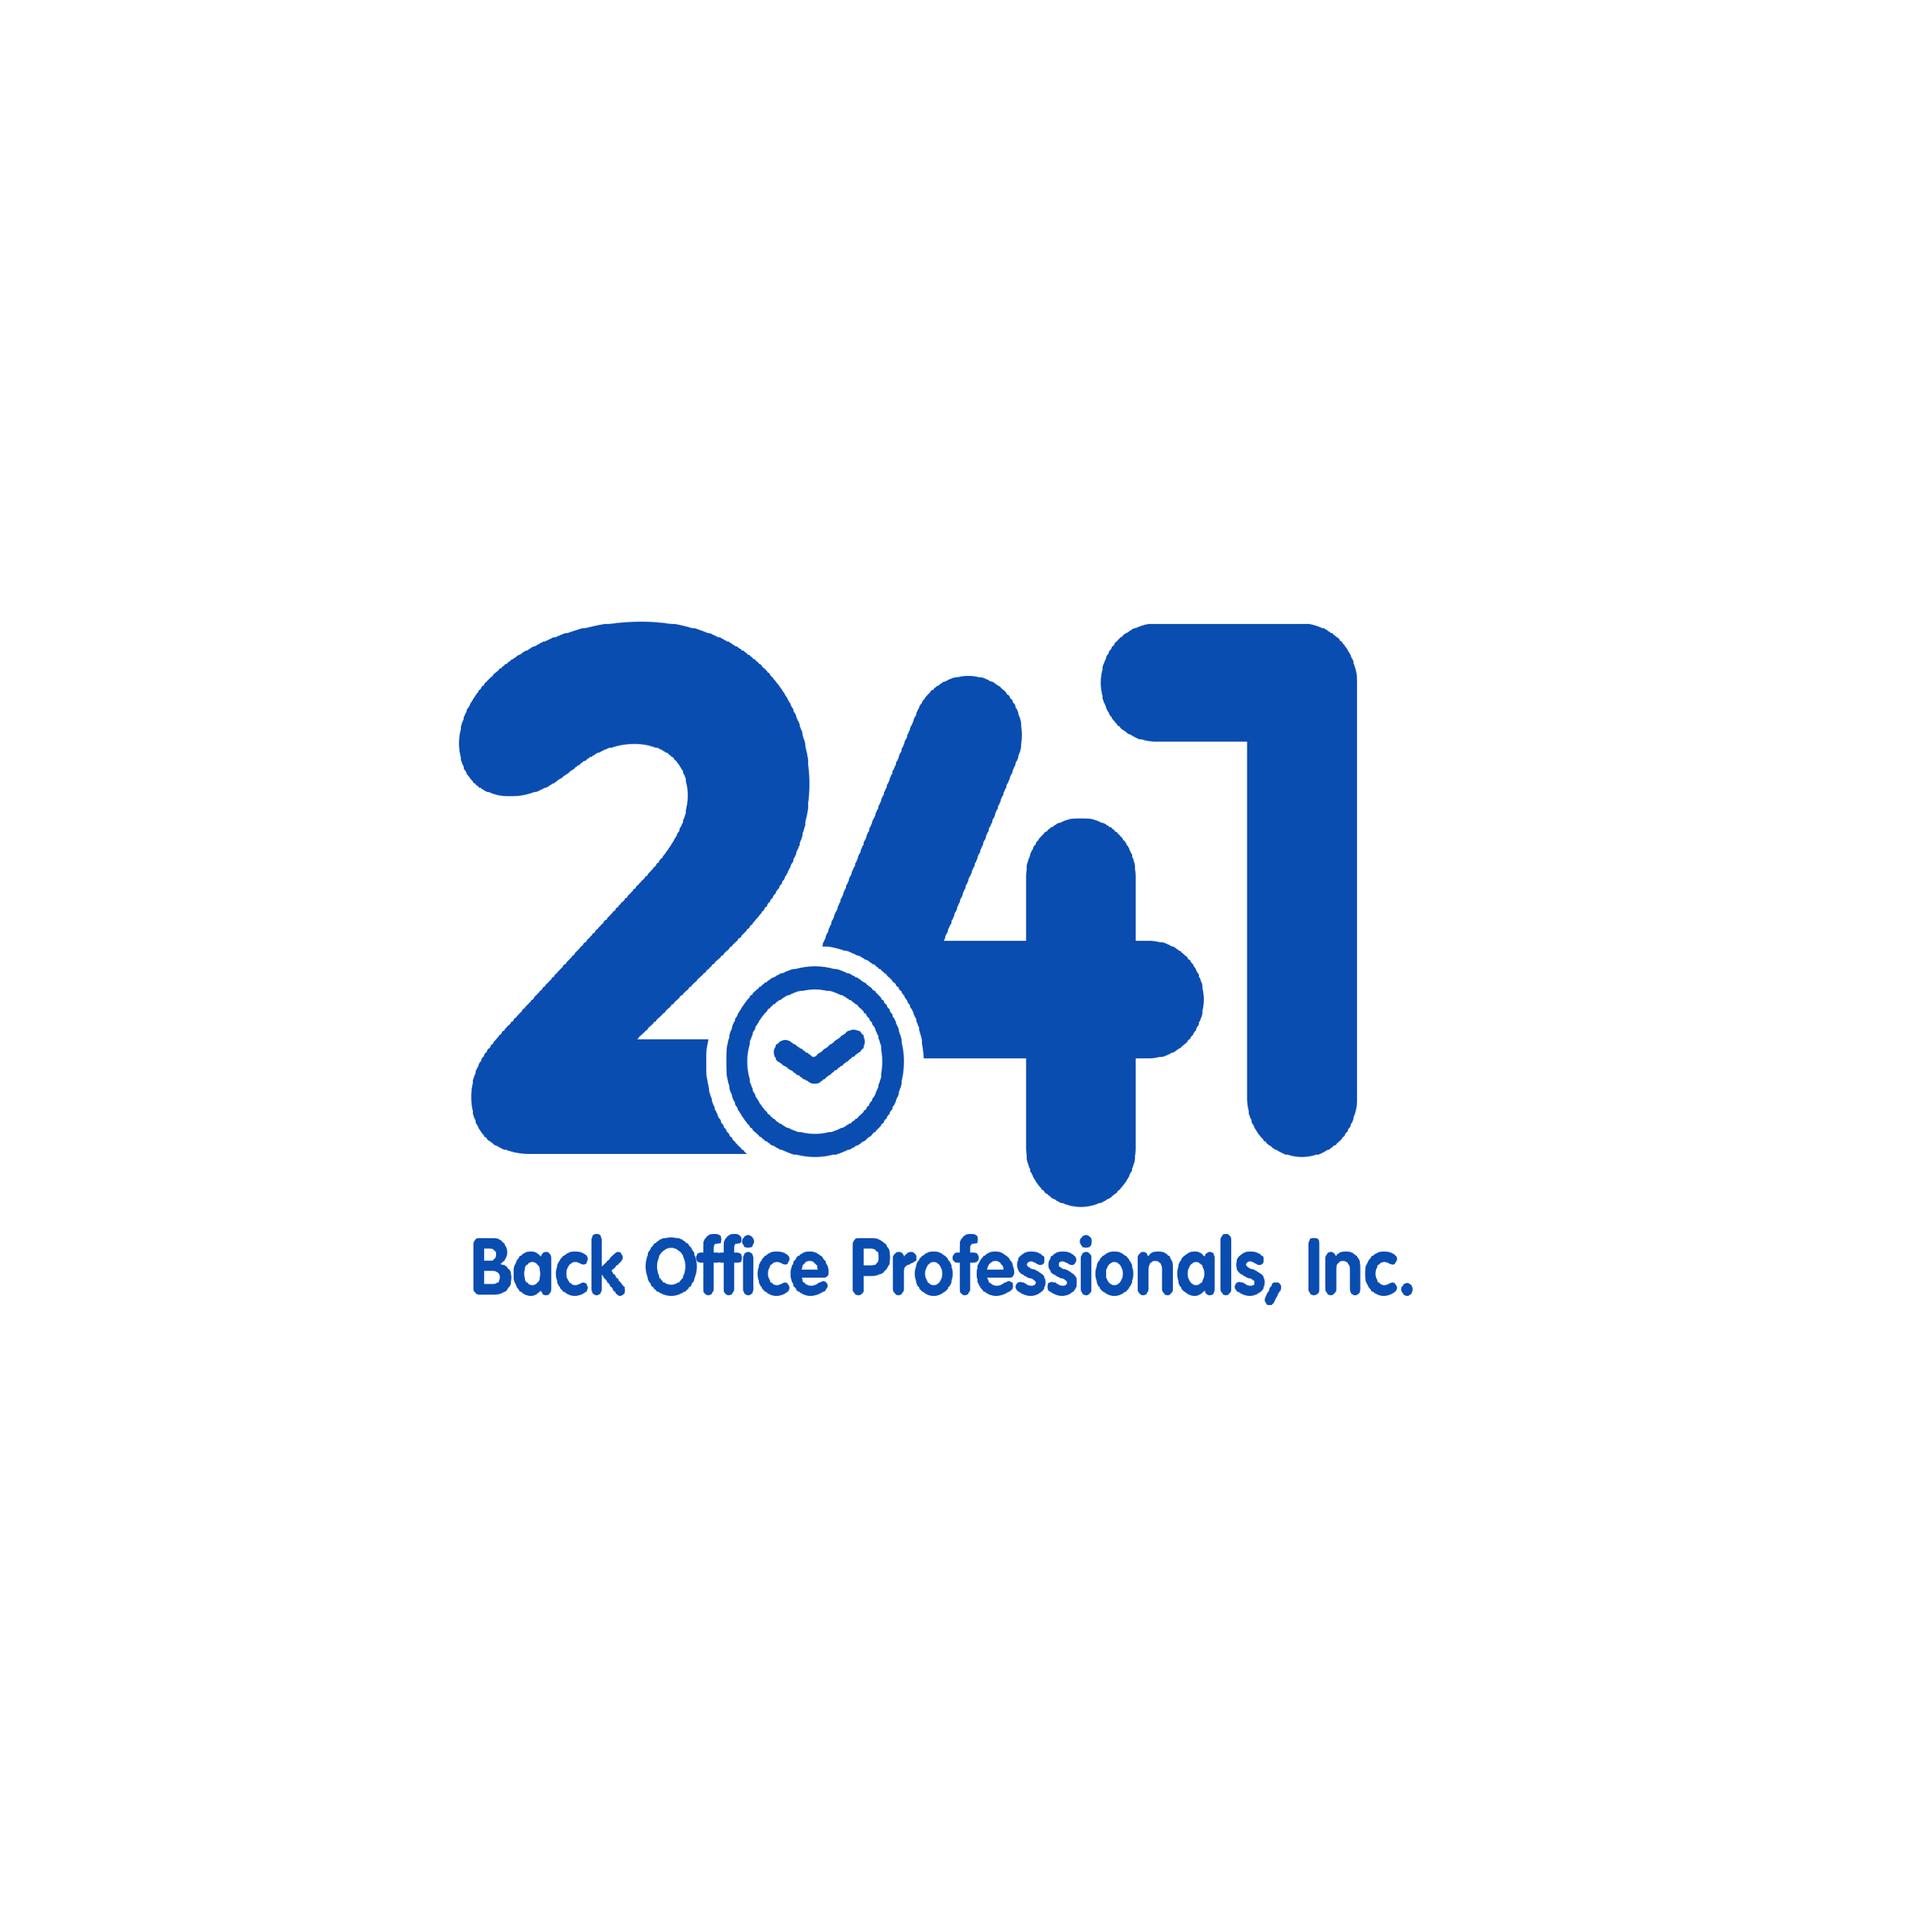 247 Back Office Professionals, Inc.